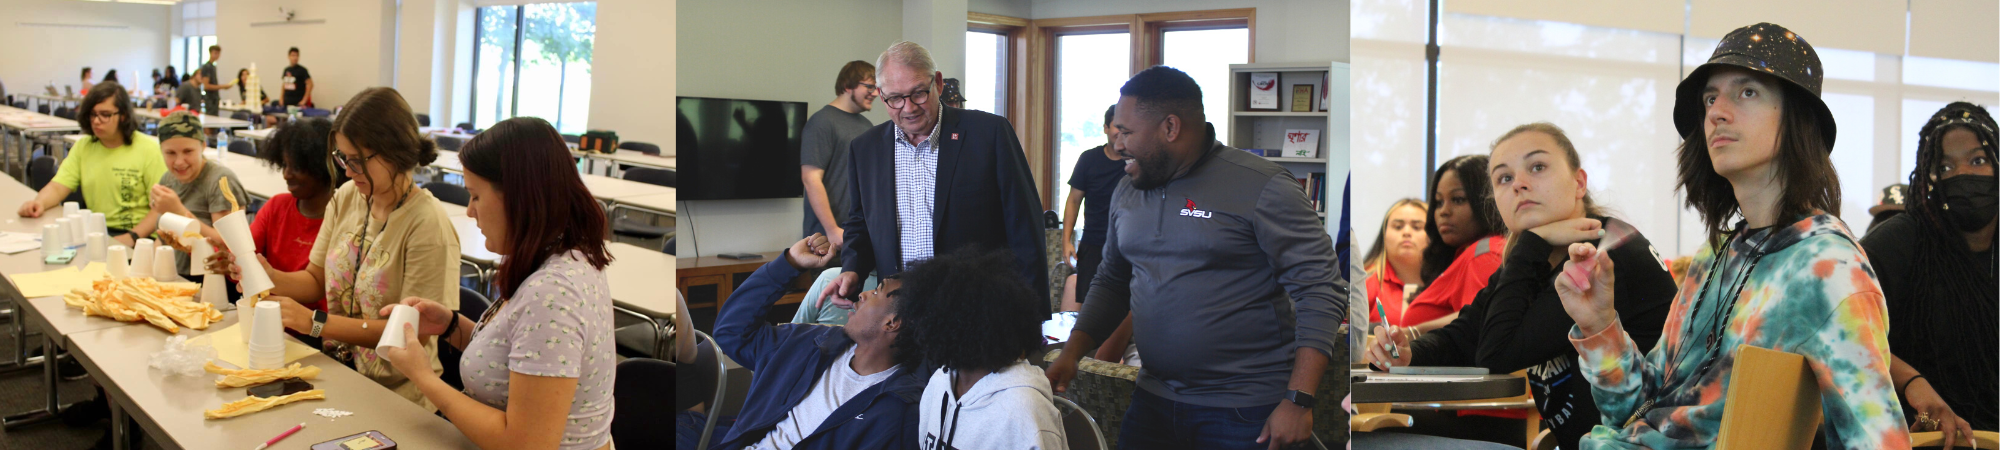 Image 1: Students working together to build a tower. Image 2: SVSU President Donald Bachand chatting with a couple of students. Image 3: Students paying attention during a presentation.